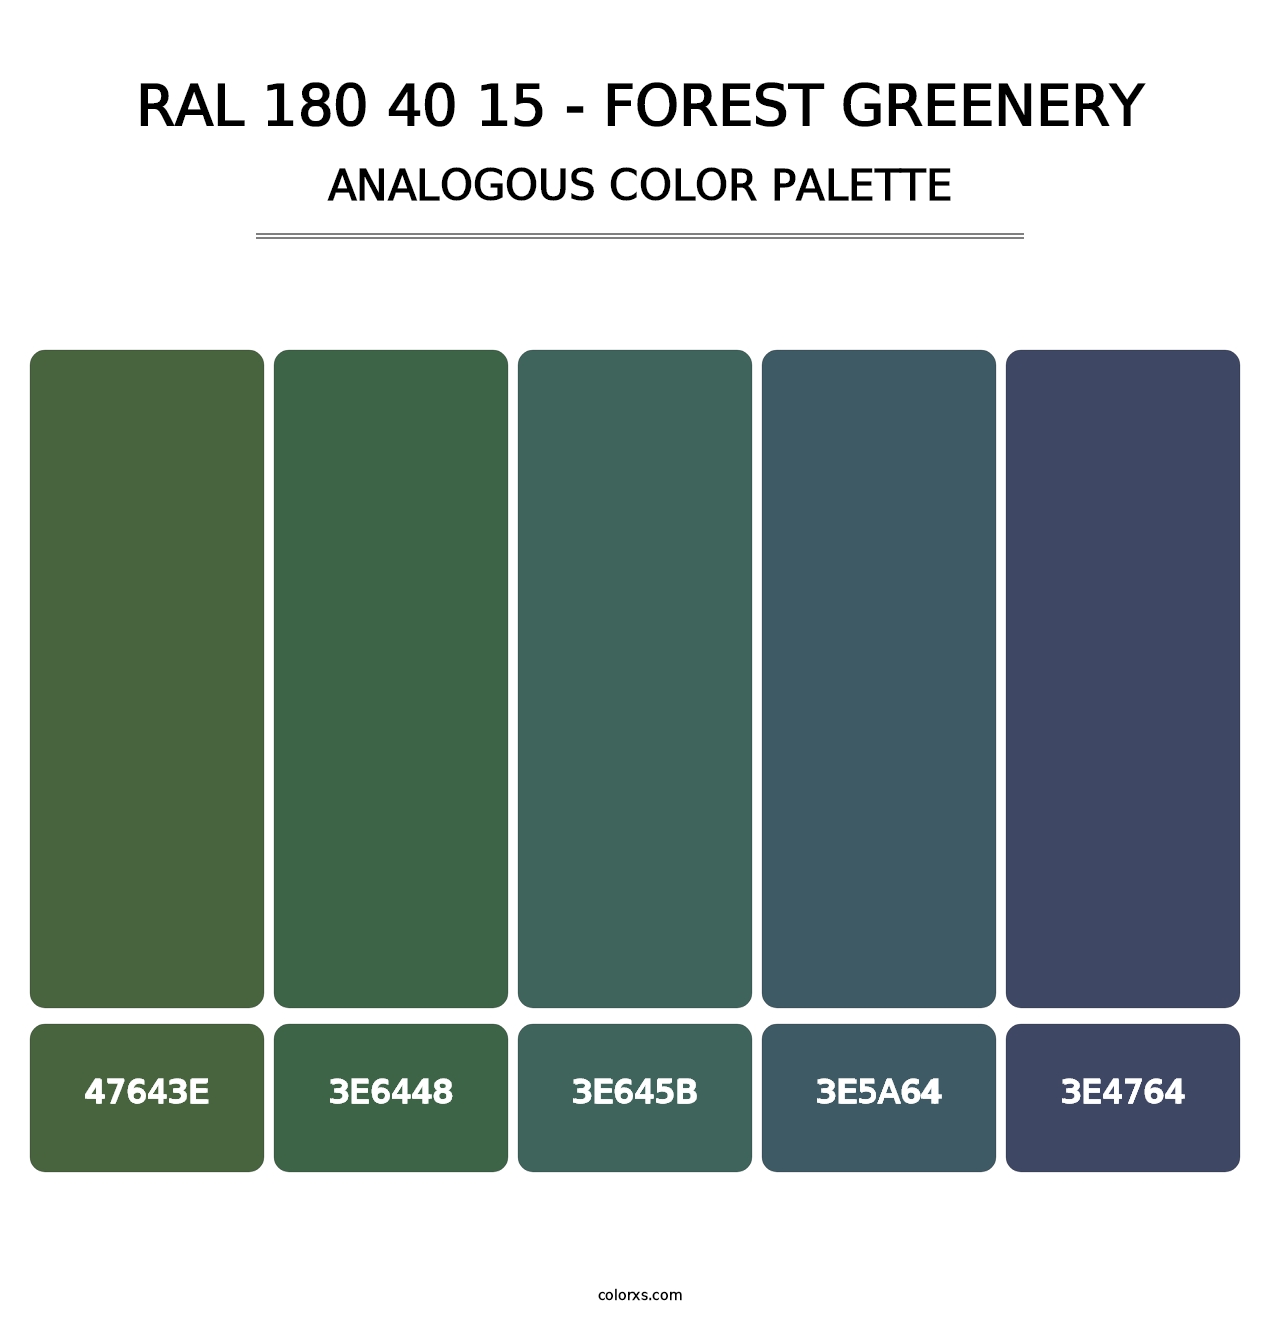 RAL 180 40 15 - Forest Greenery - Analogous Color Palette